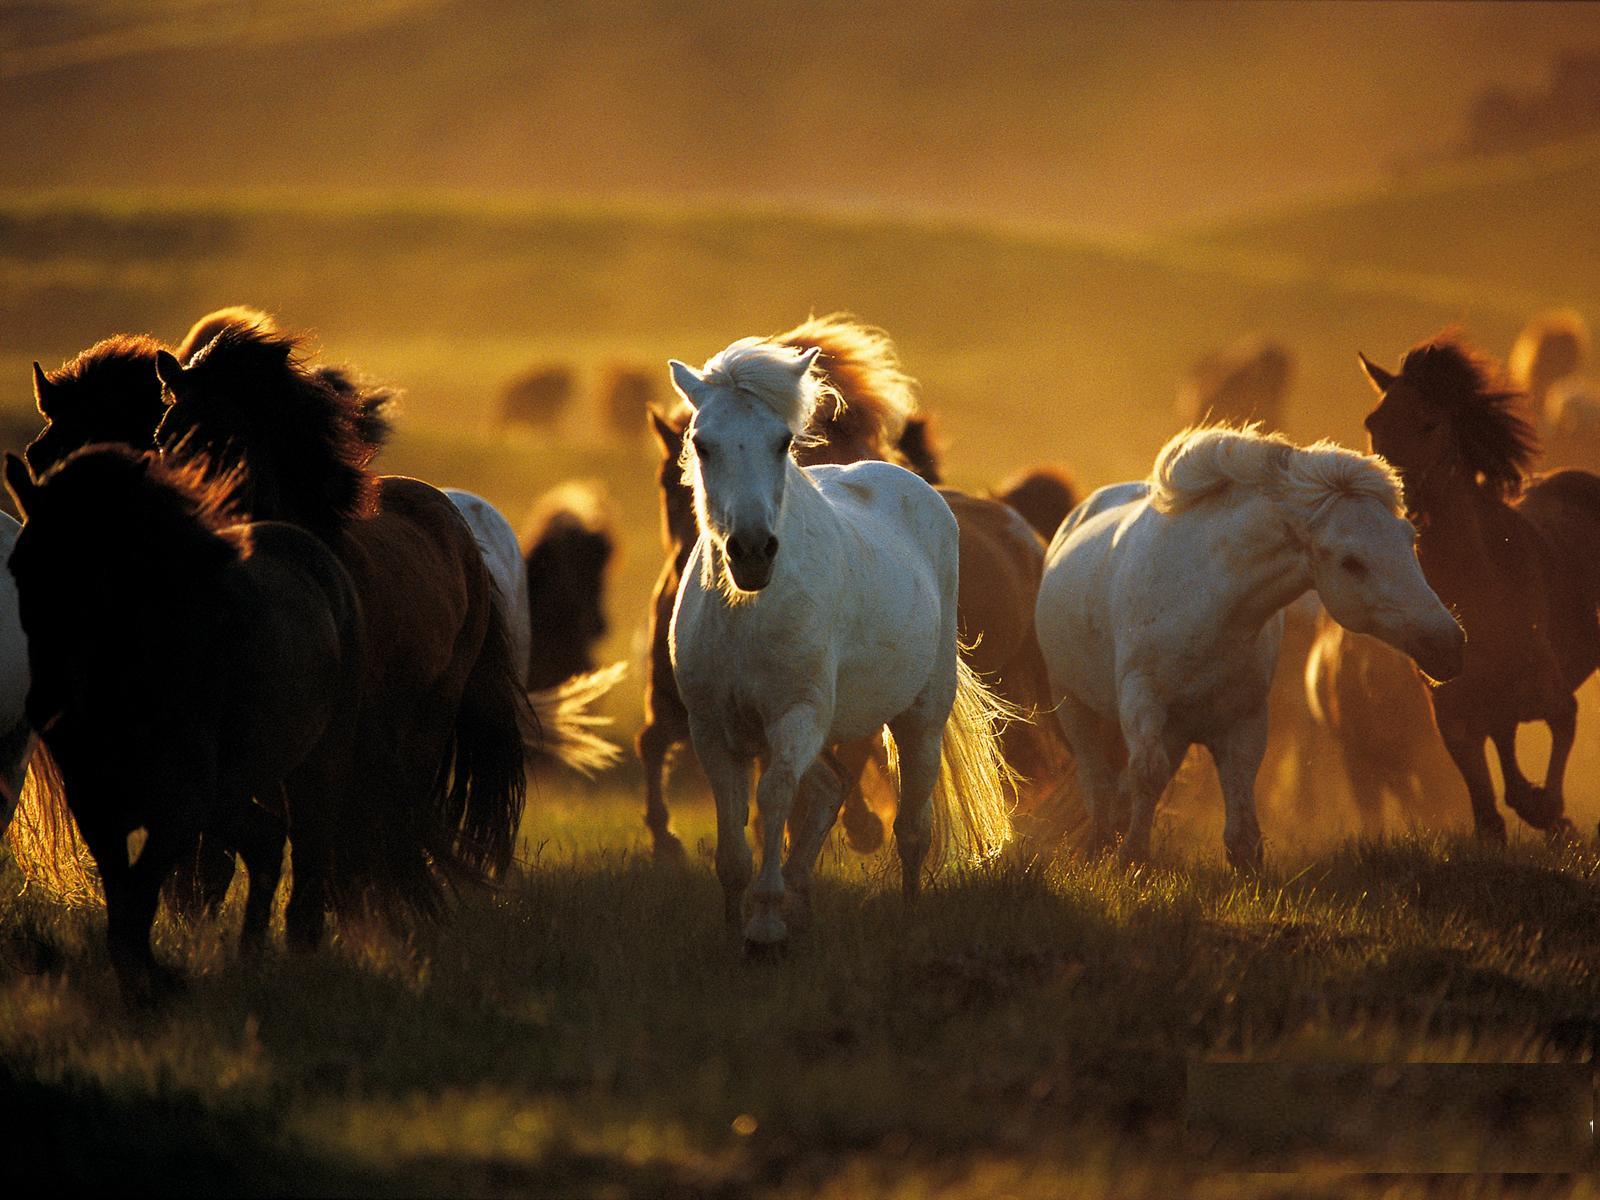 Wild horses wallpapers - Image Backgrounds